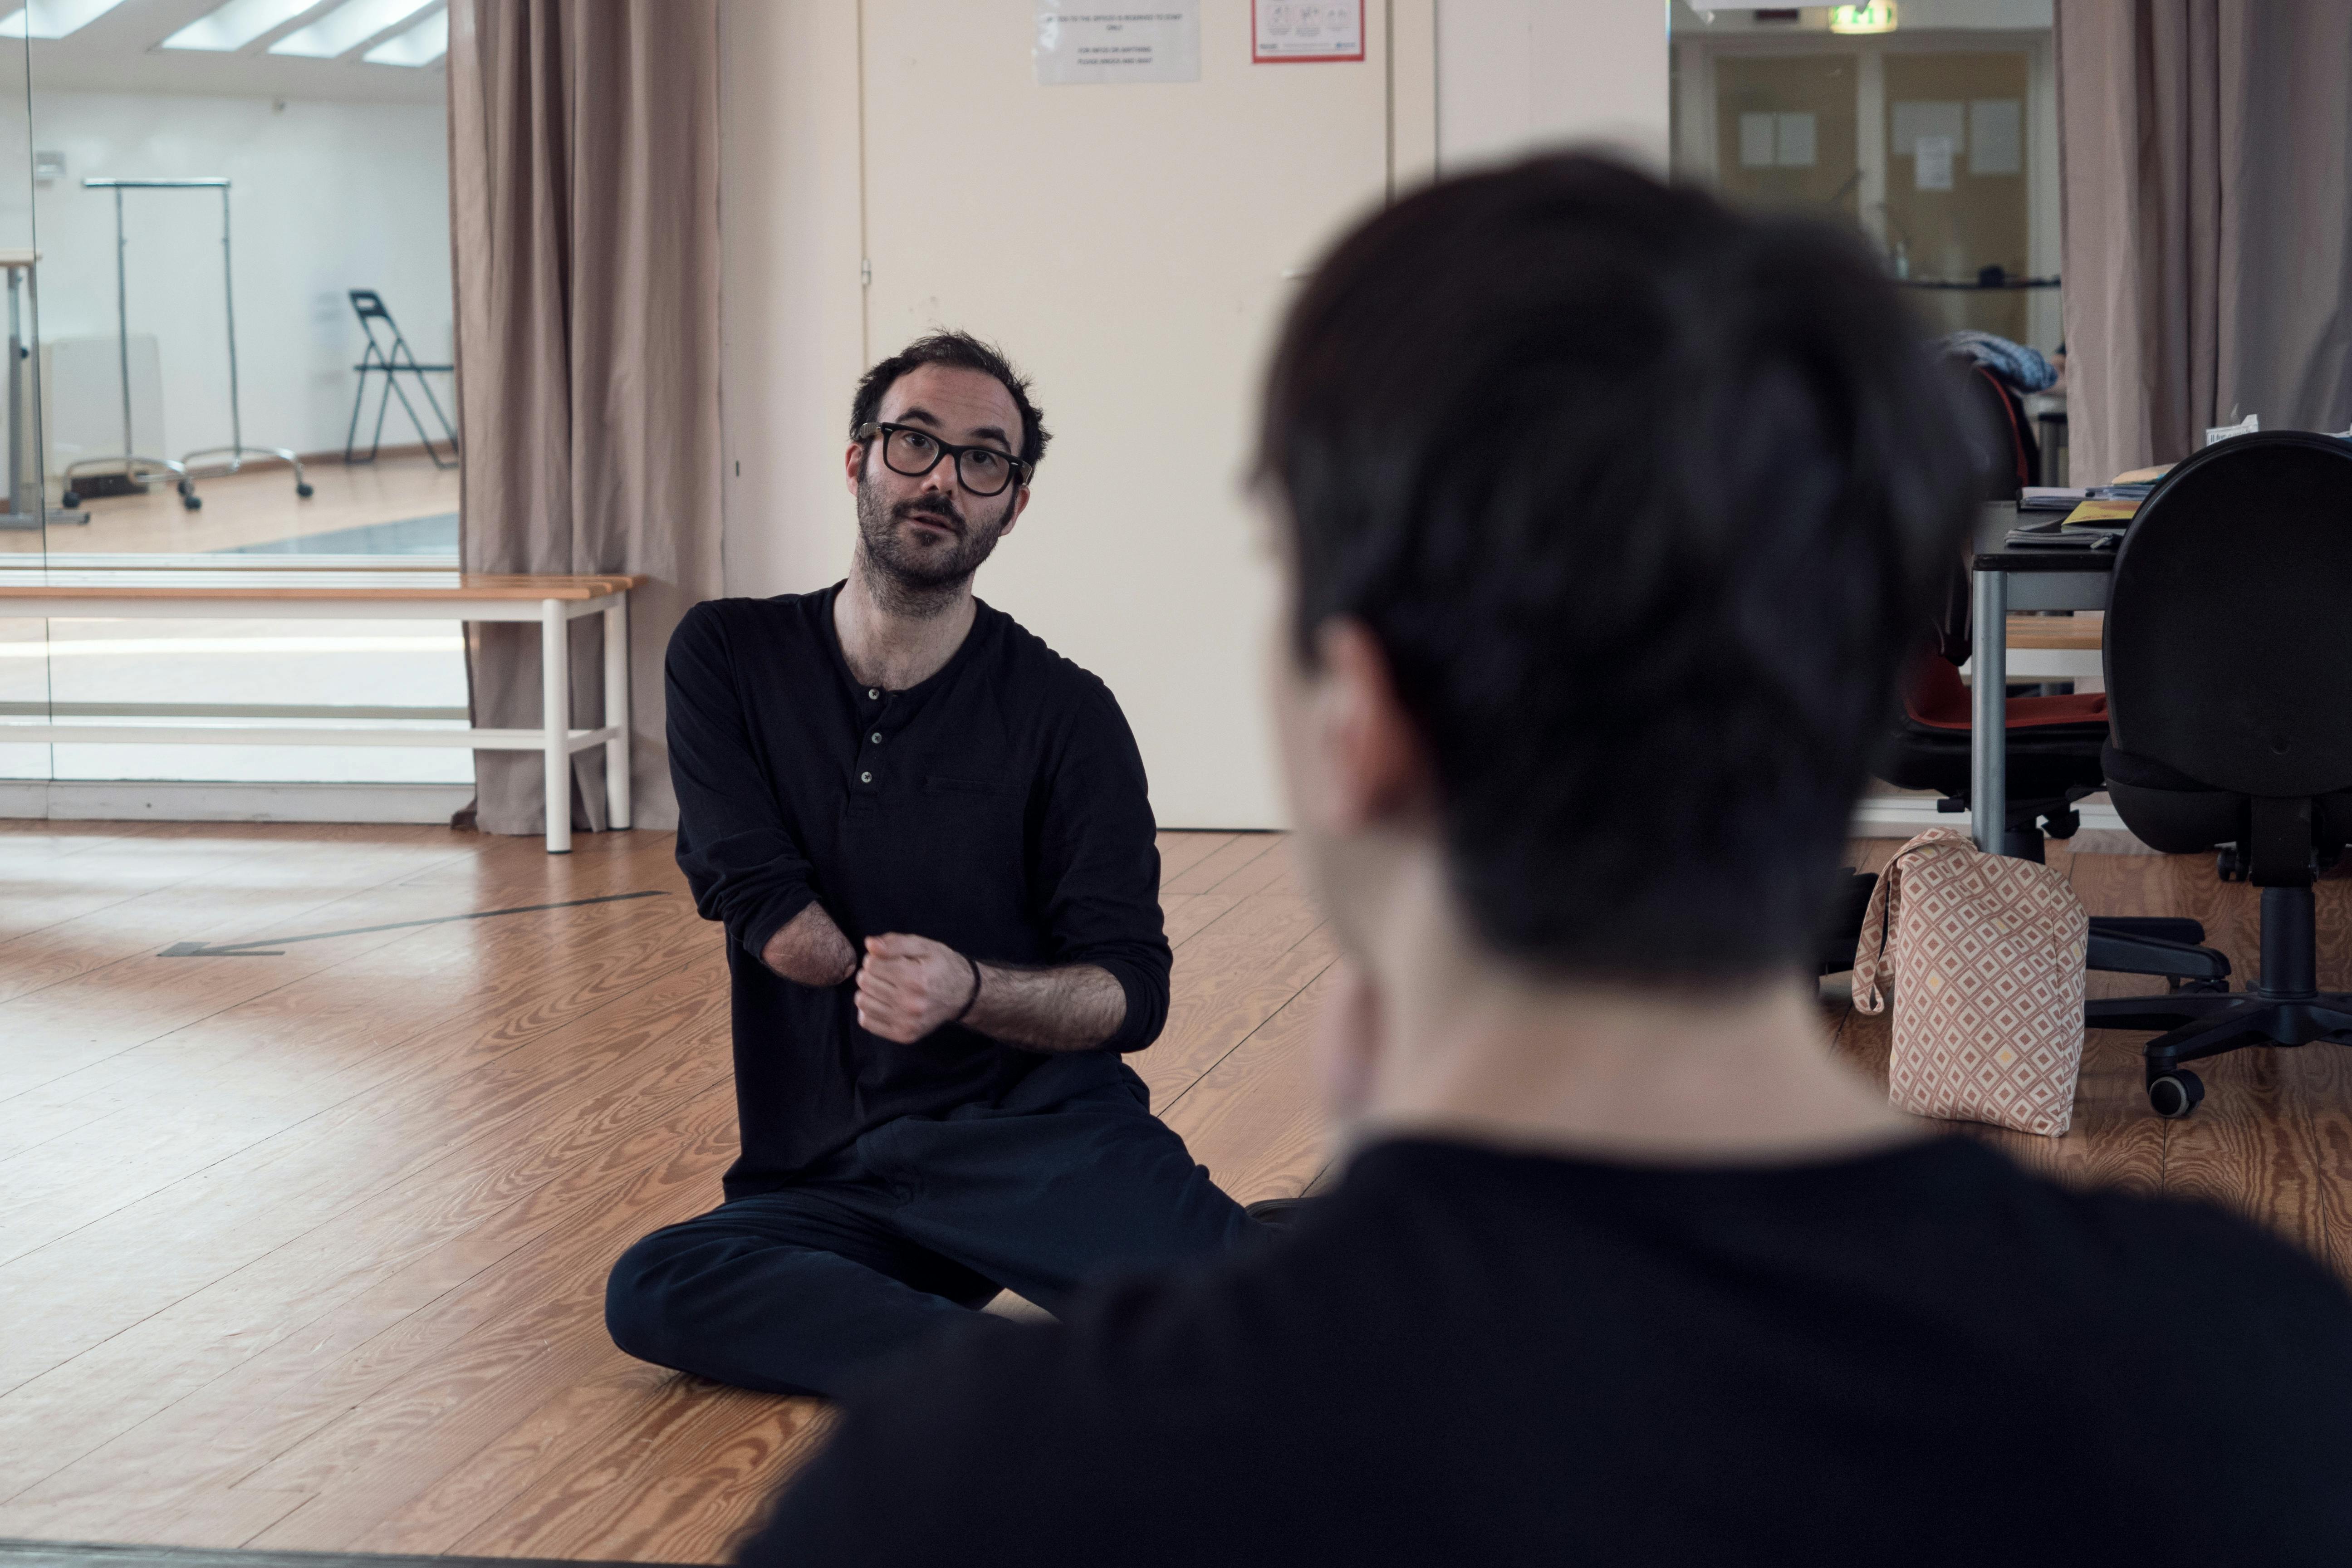 Aristide Rontini, seated on the floor in the Studio, speaks to the dancer Cristian Cucco, seated in front of him.